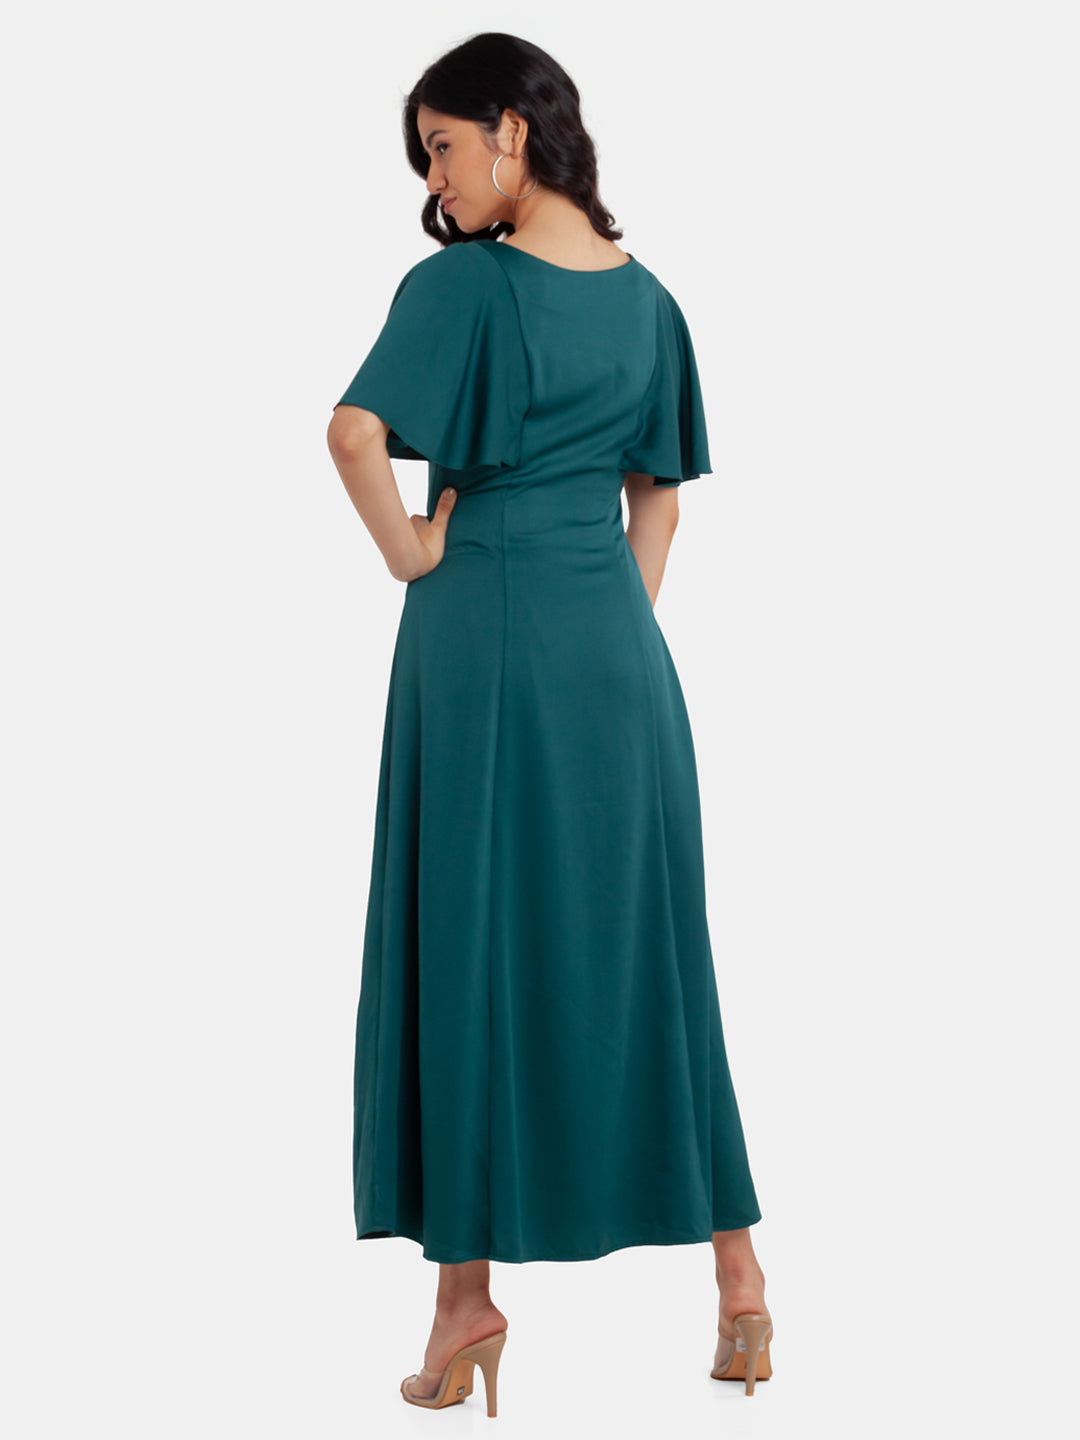 Green Embellished Flared Sleeve Maxi Dress For Women